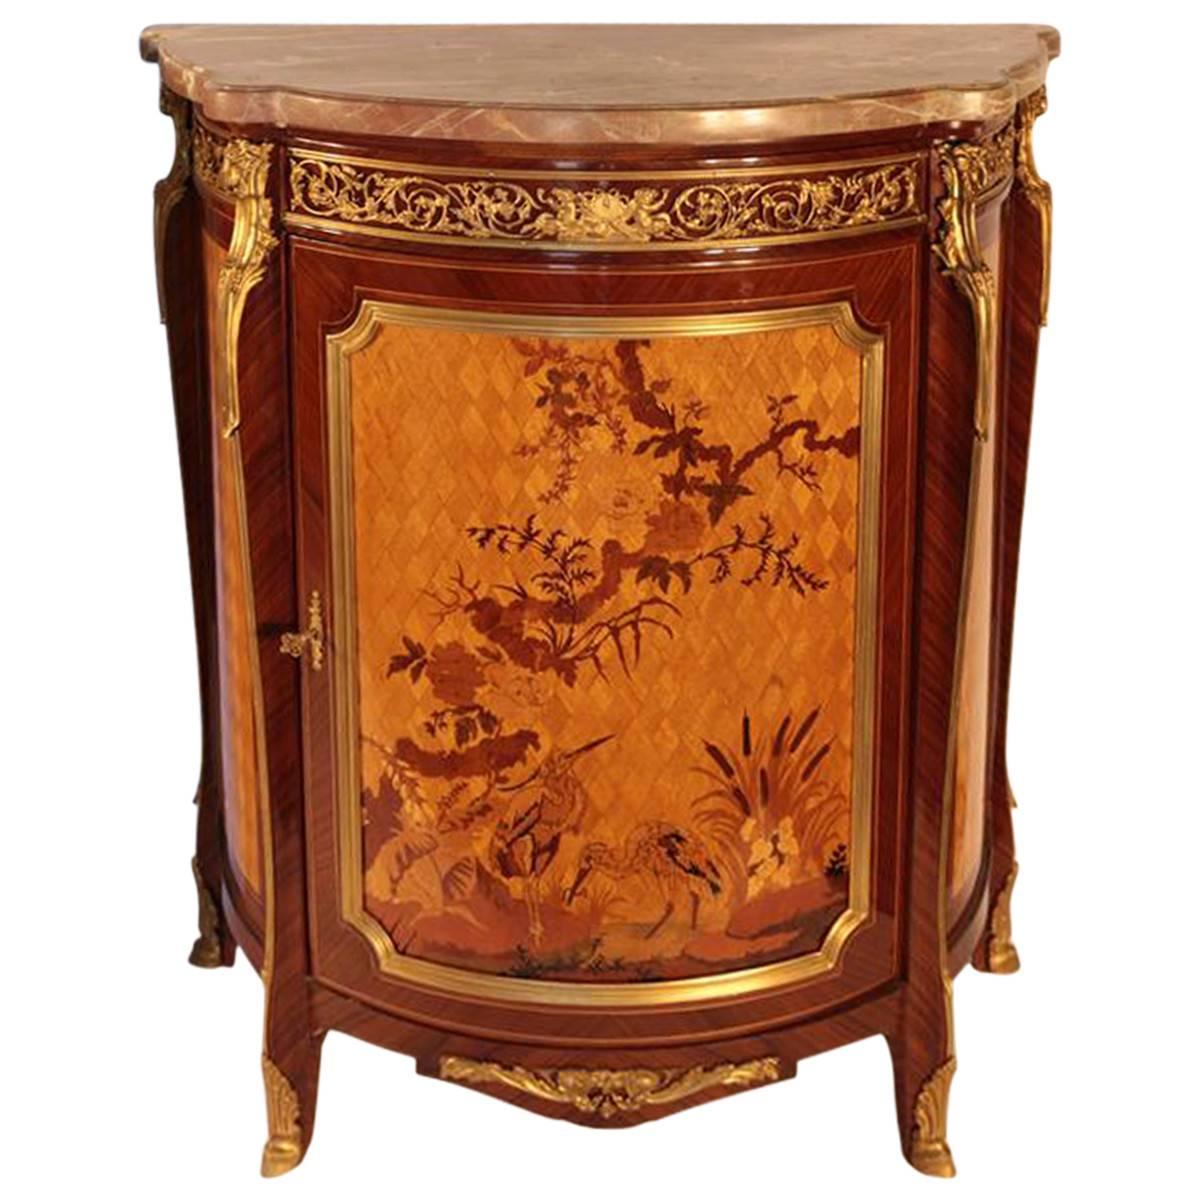 The delicate brass trimmings in an ornate floral motif of these vintage French side tables are reminiscent of an even earlier era. In rich cherry and gold colors, these romantically decorated side tables provide measure: Width 19